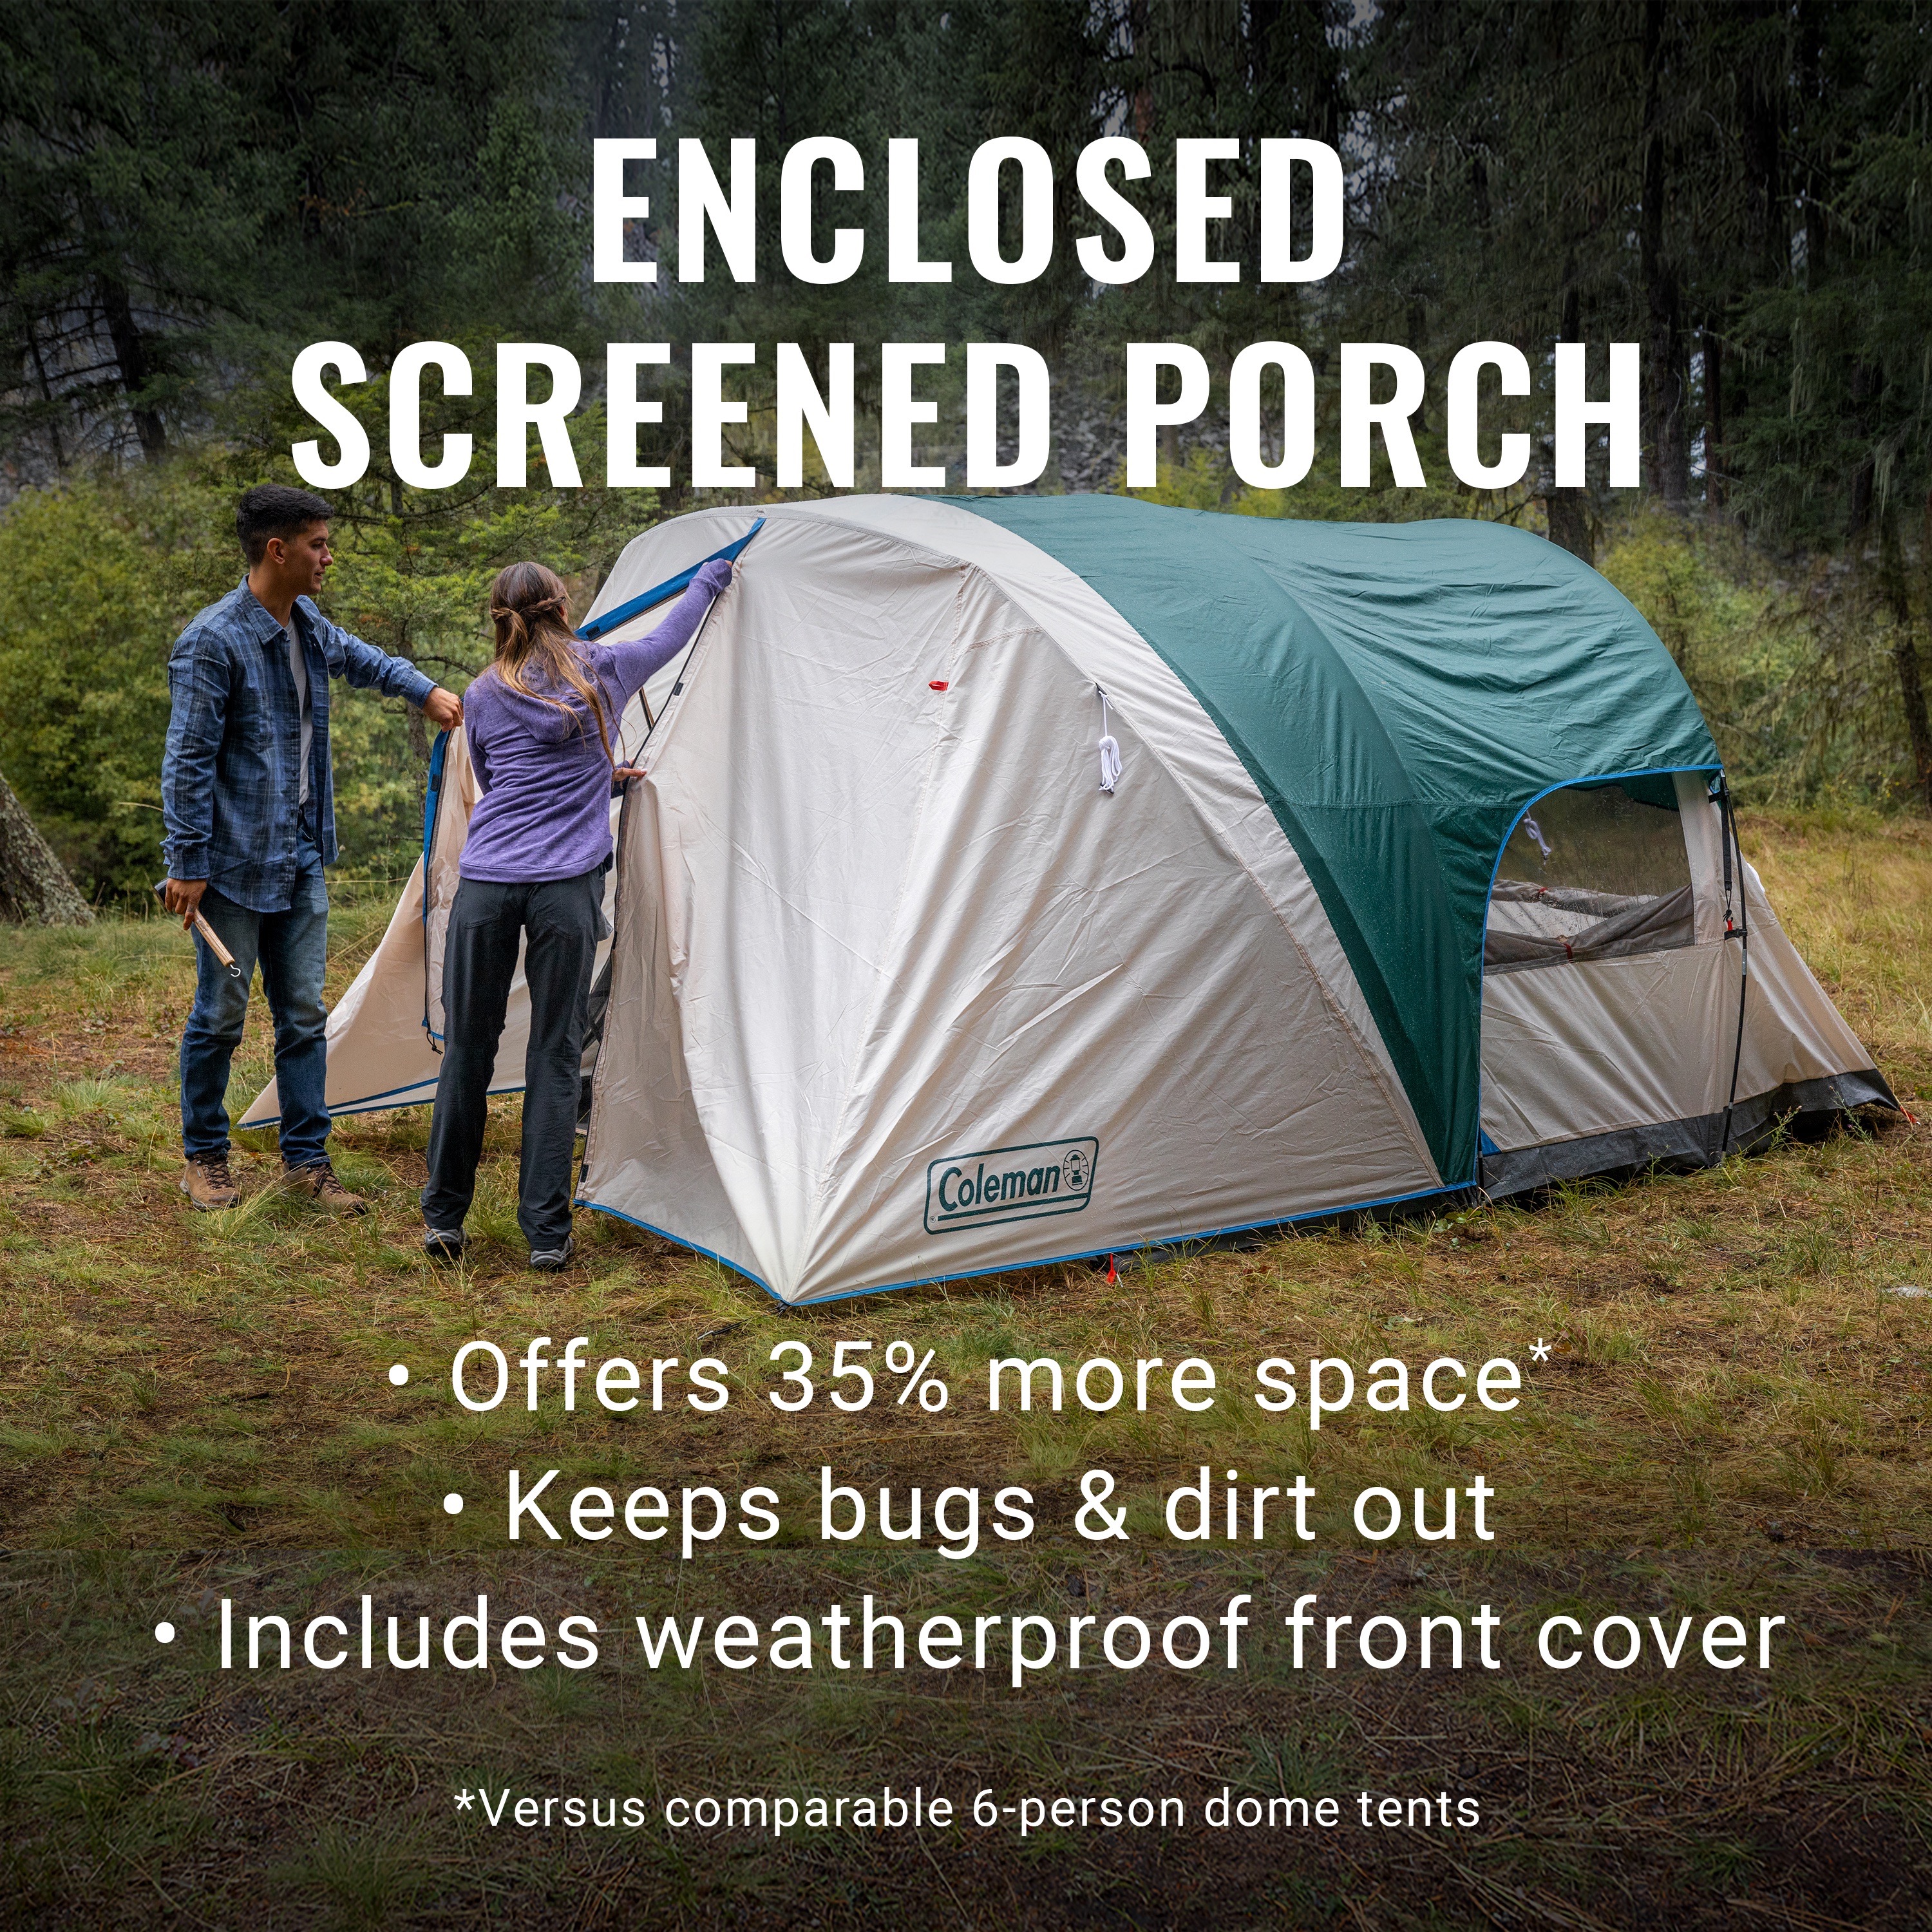 Coleman 6-Person Cabin Tent with Enclosed Screen Porch, 2 Rooms, Green - image 3 of 7